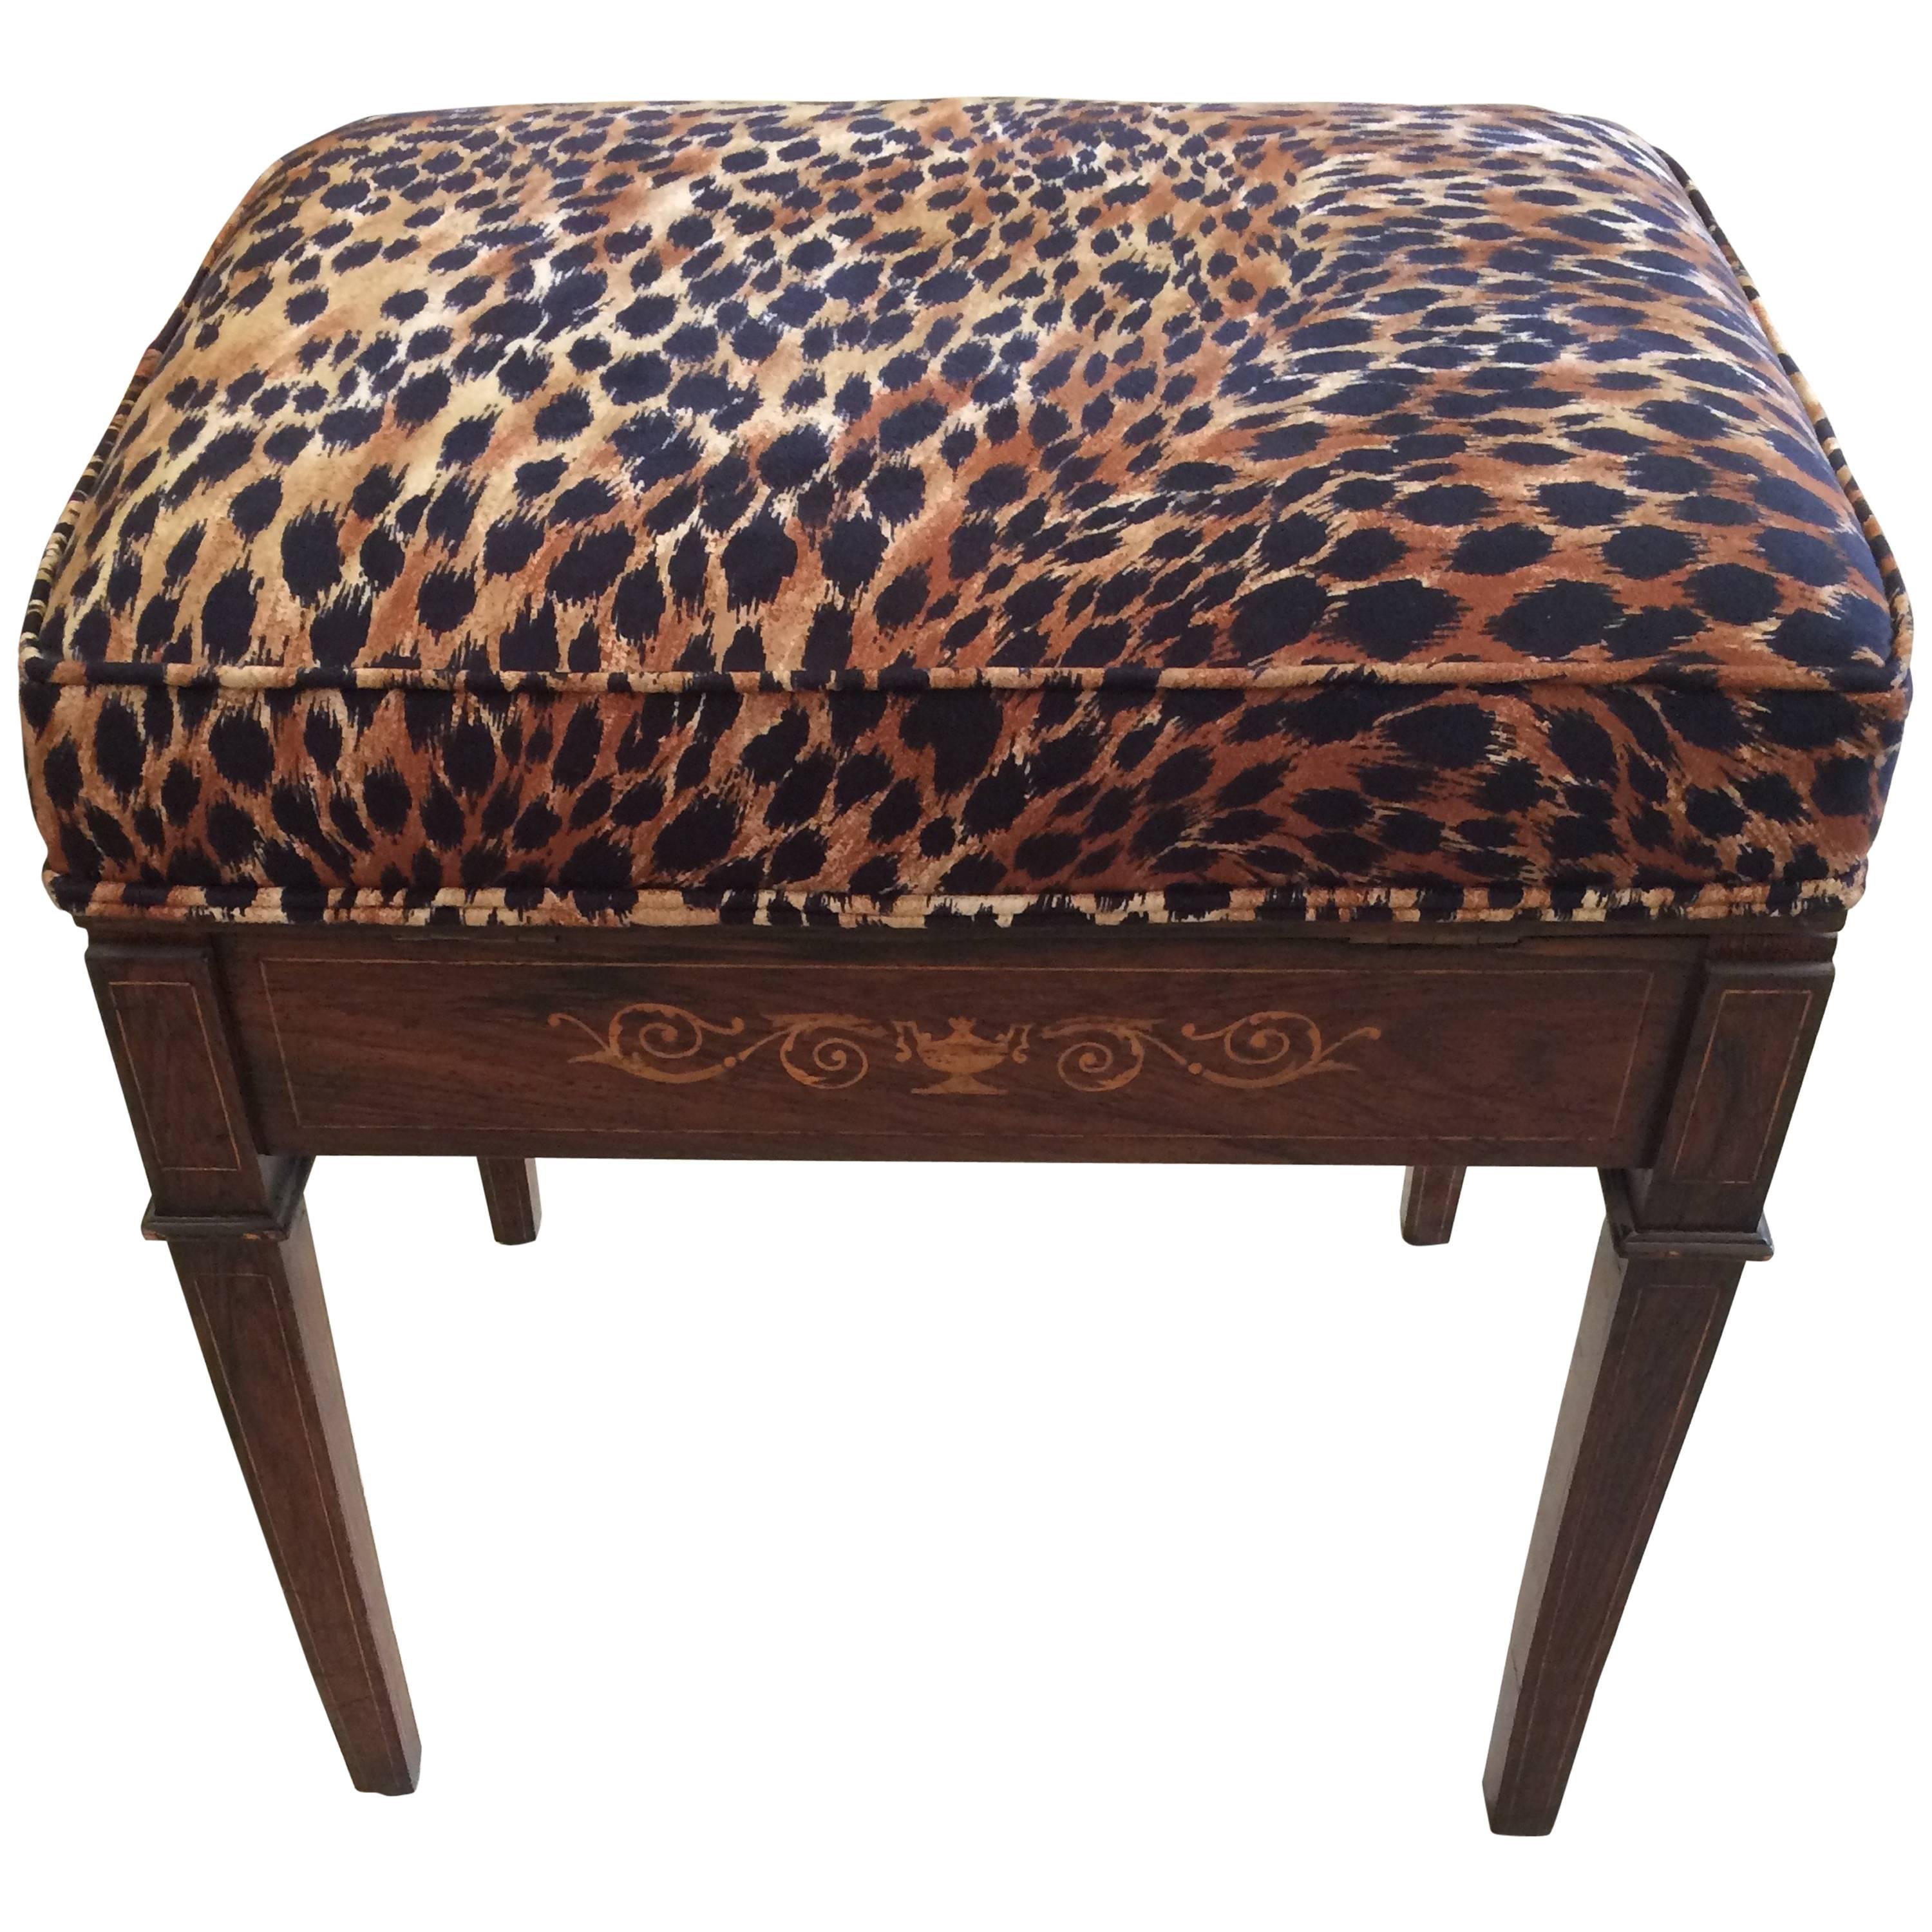 Classic Mahogany Little Bench with Animal Print Cushion Top